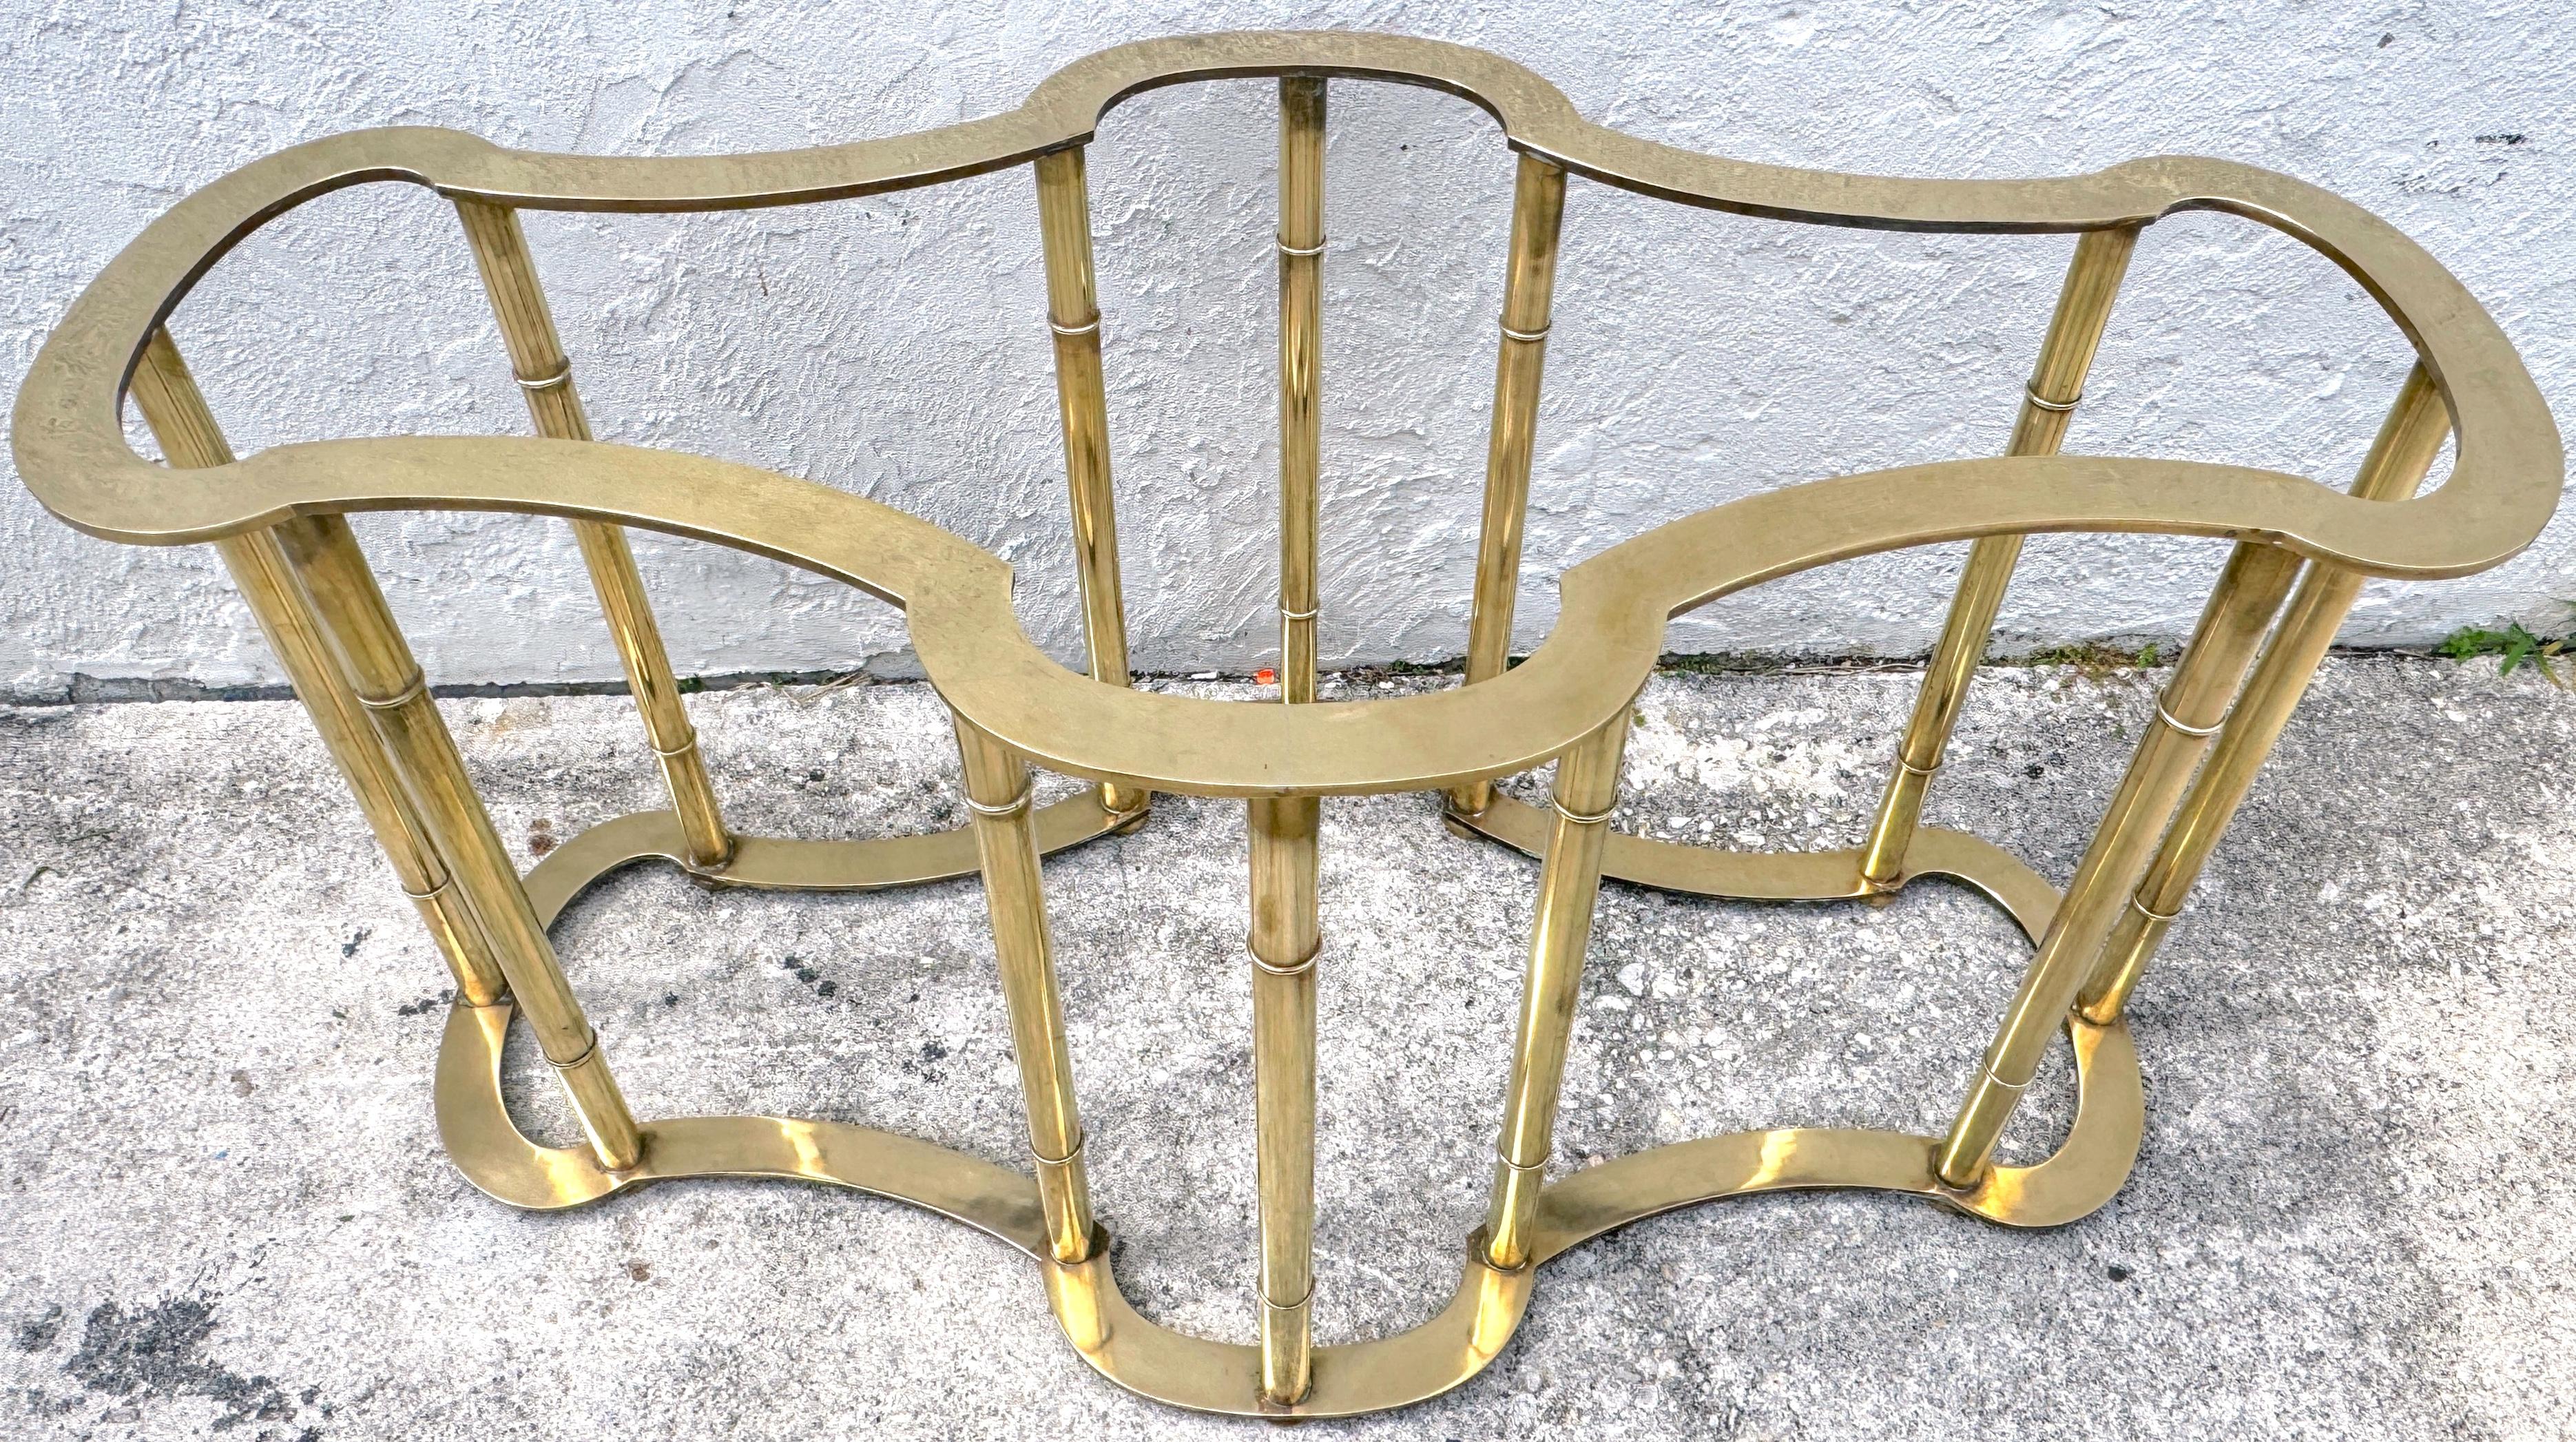 Mastercraft Solid Brass Faux Bamboo Dinning Table Base, Made in Italy 
Italy, circa 1970s

A stunning Mastercraft solid brass faux bamboo dining table base, made in Italy during the 1970s, Mastercraft, distinguished from its peers by its iconic